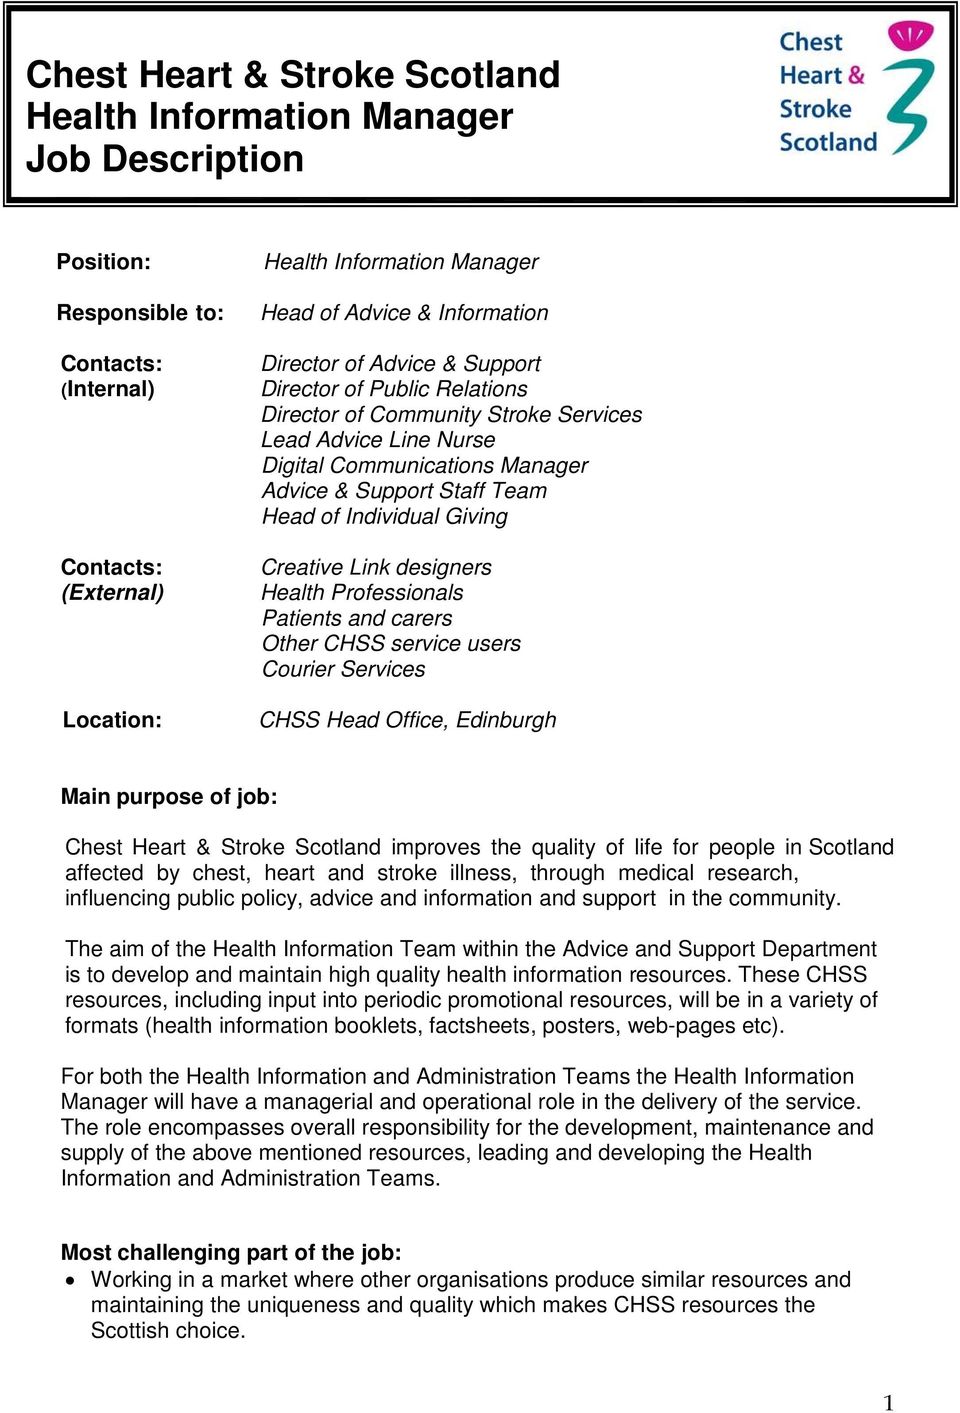 Professionals Patients and carers Other CHSS service users Courier Services CHSS Head Office, Edinburgh Main purpose of job: Chest Heart & Stroke Scotland improves the quality of life for people in